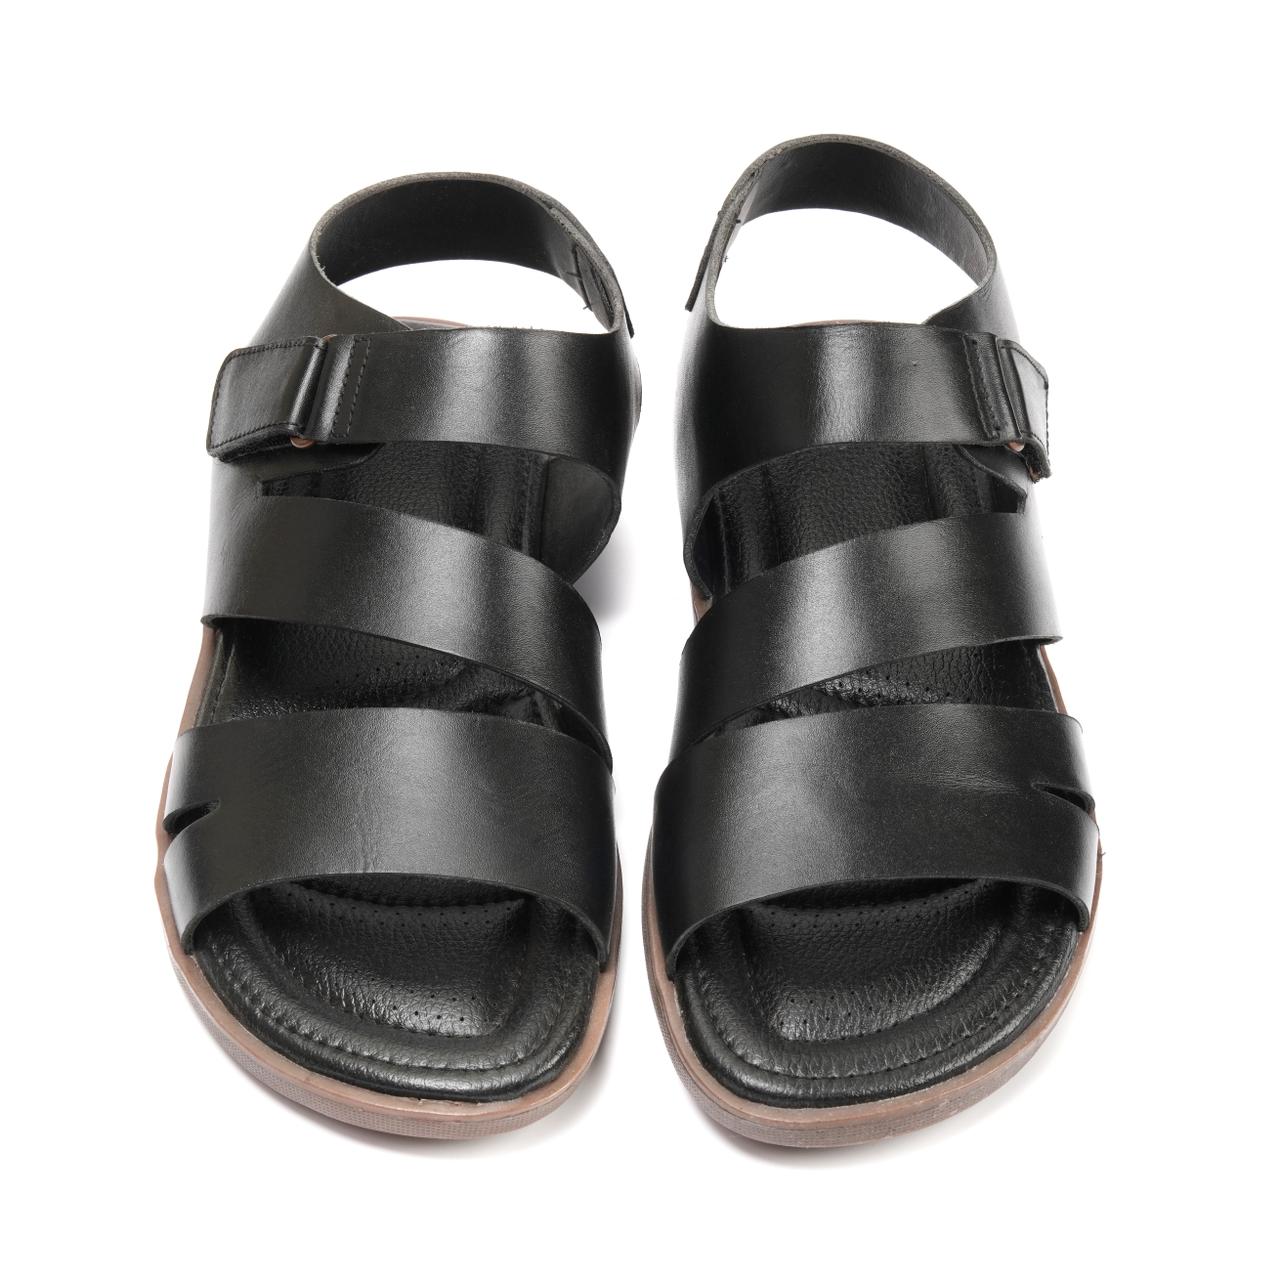 701-Black Sandal style Pure Cow Leather Shoes Trending shoes